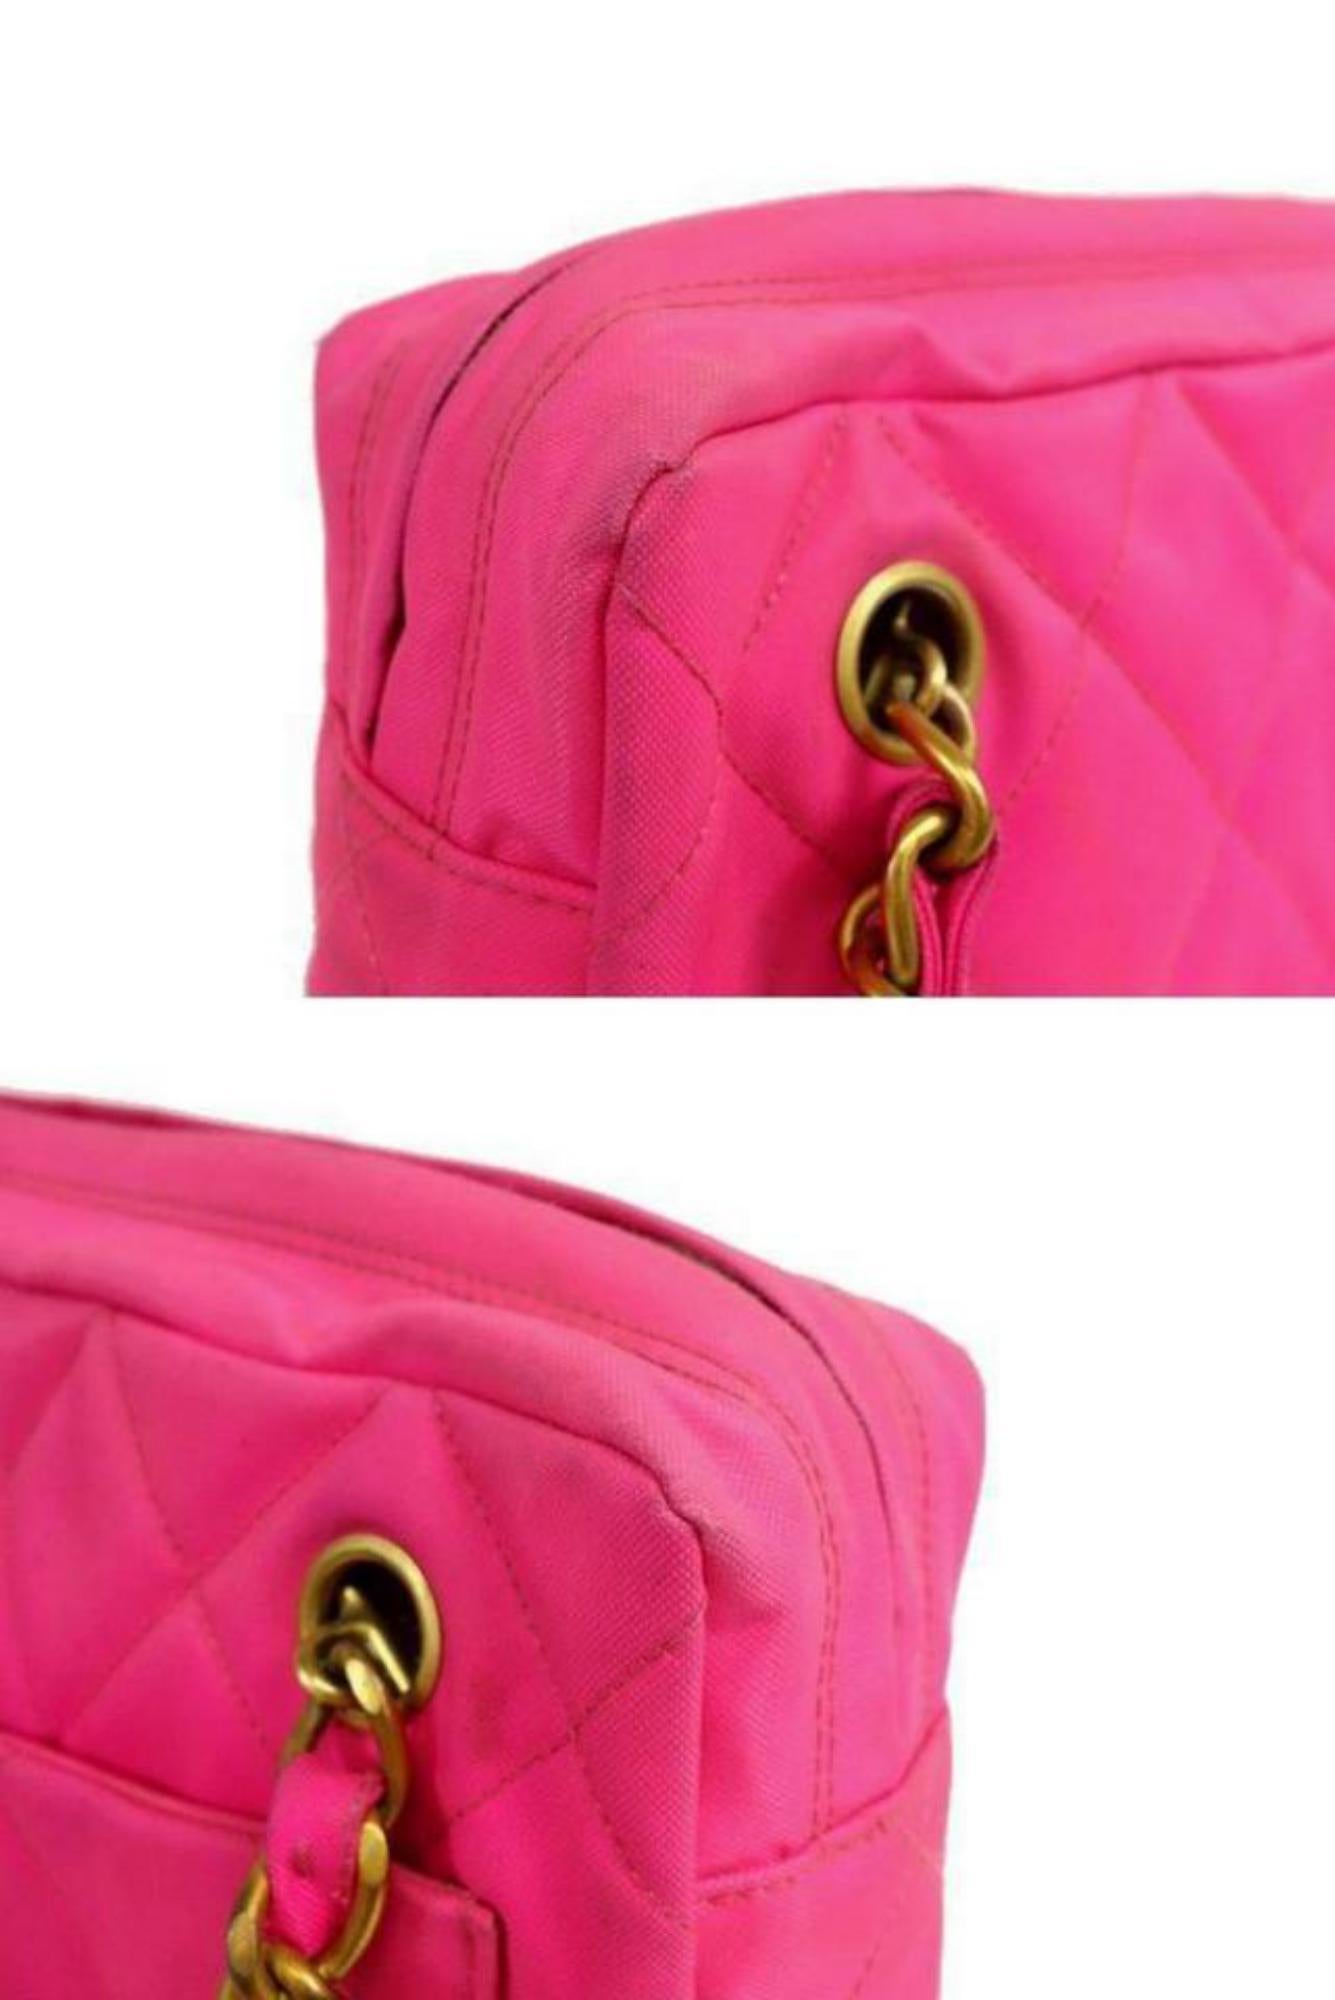 Chanel Camera Quilted Neon Hot Cc Charm Chain Tote 231187 Pink Canvas Shoulder B For Sale 3